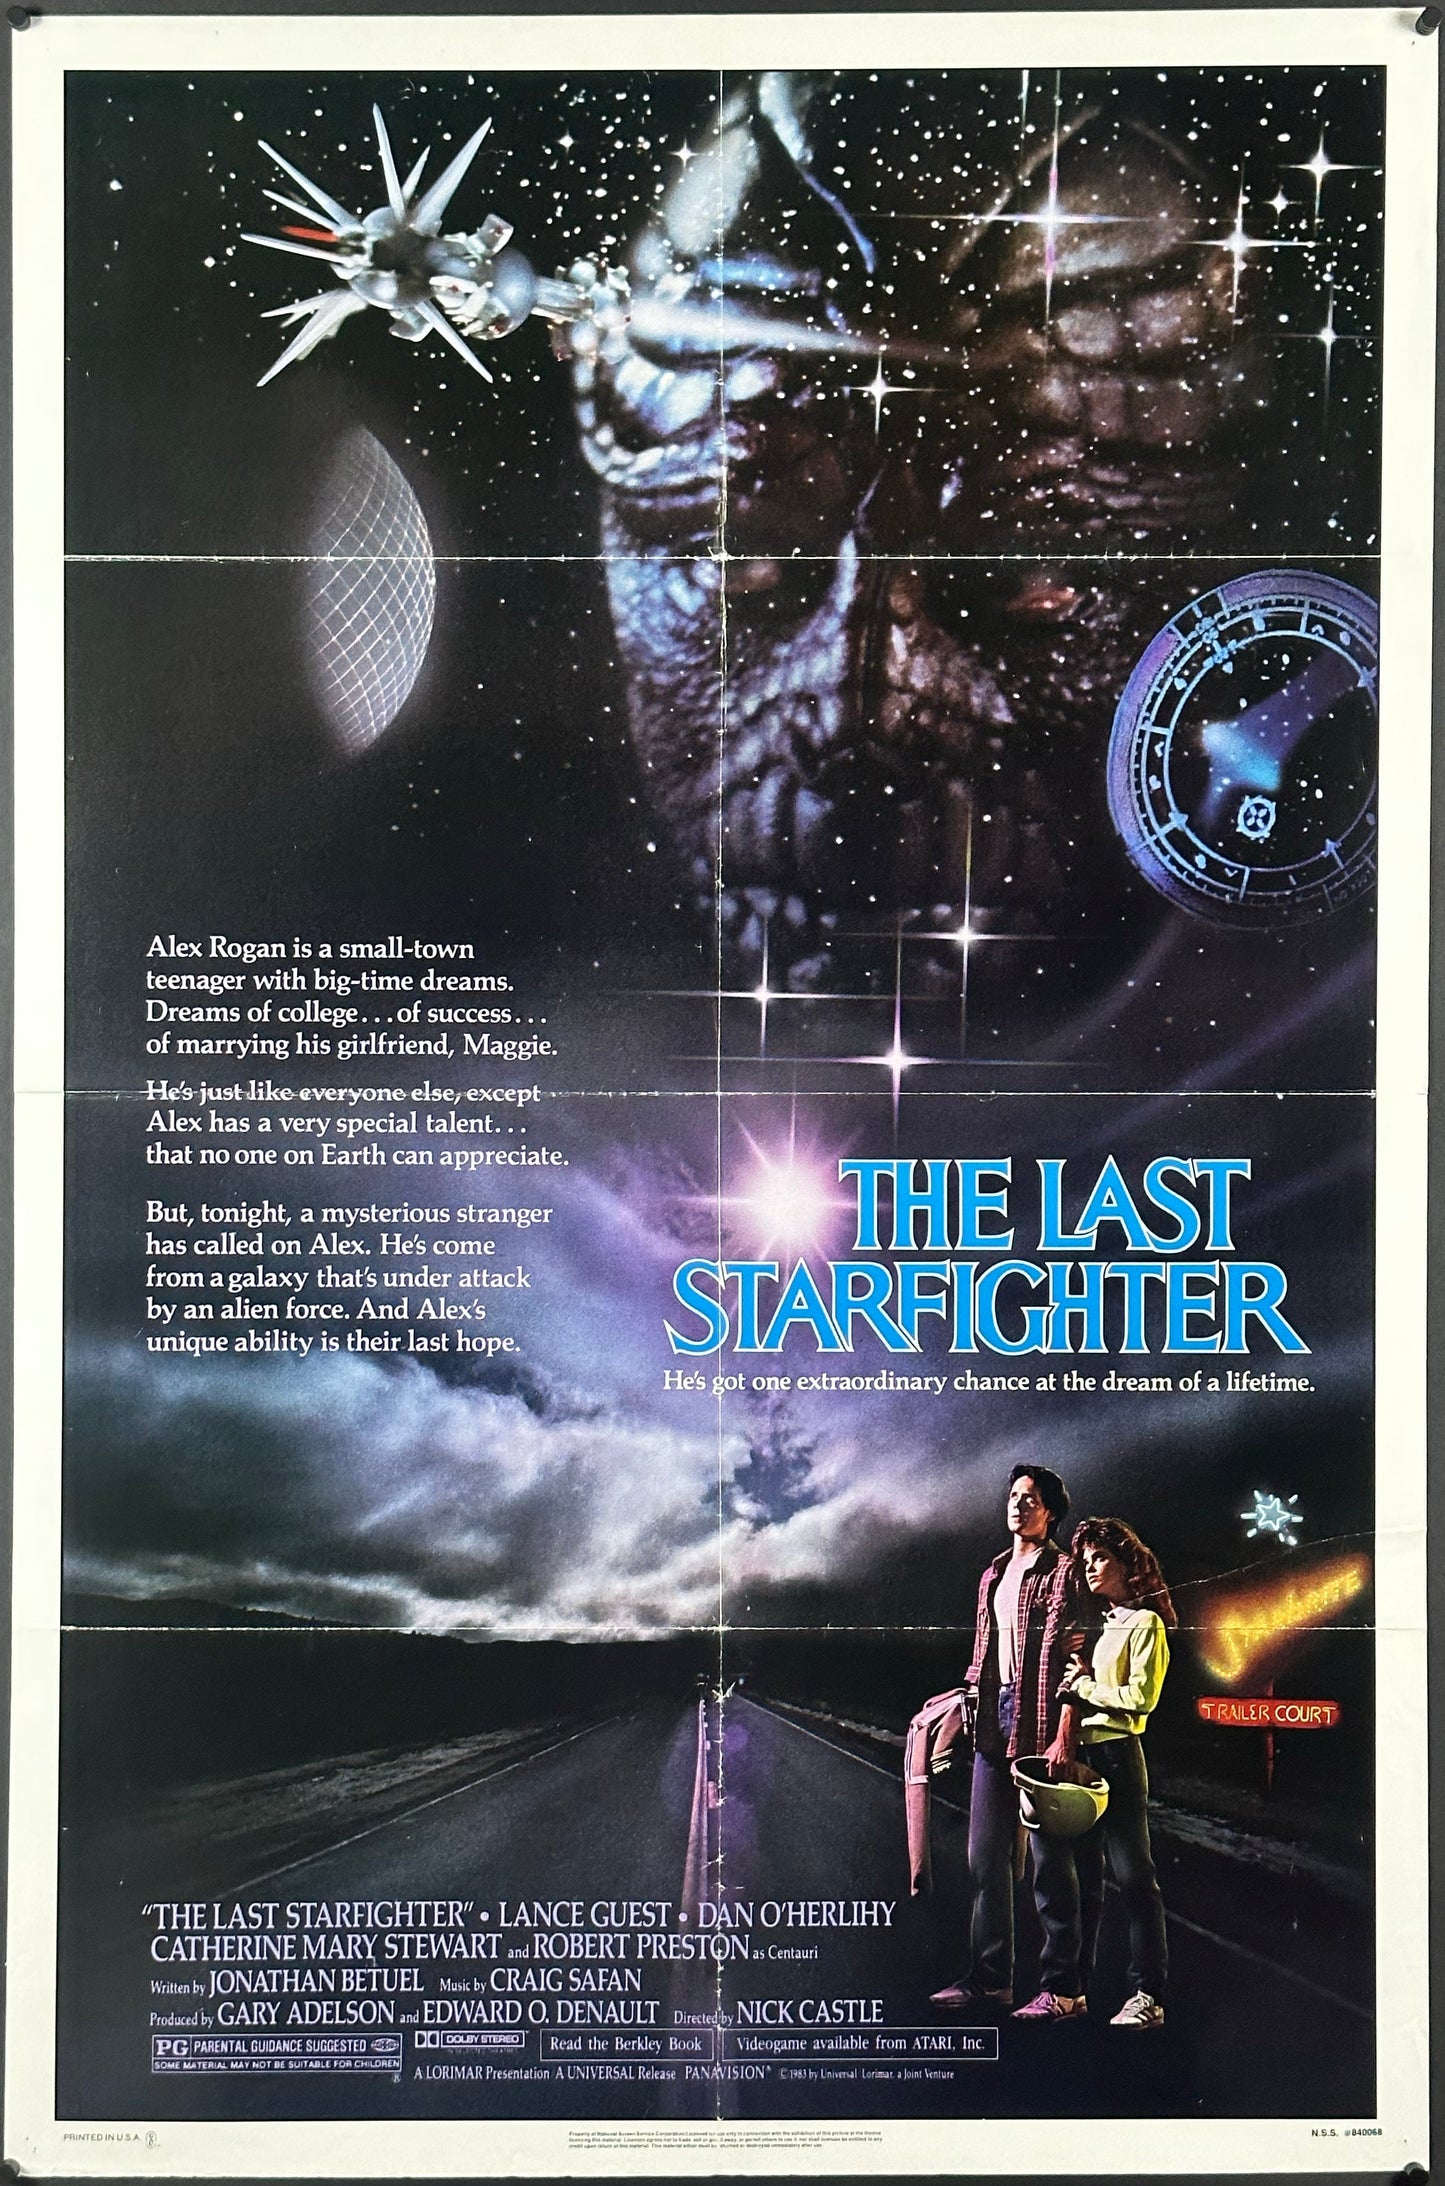 The Last Starfighter - posterpalace.com